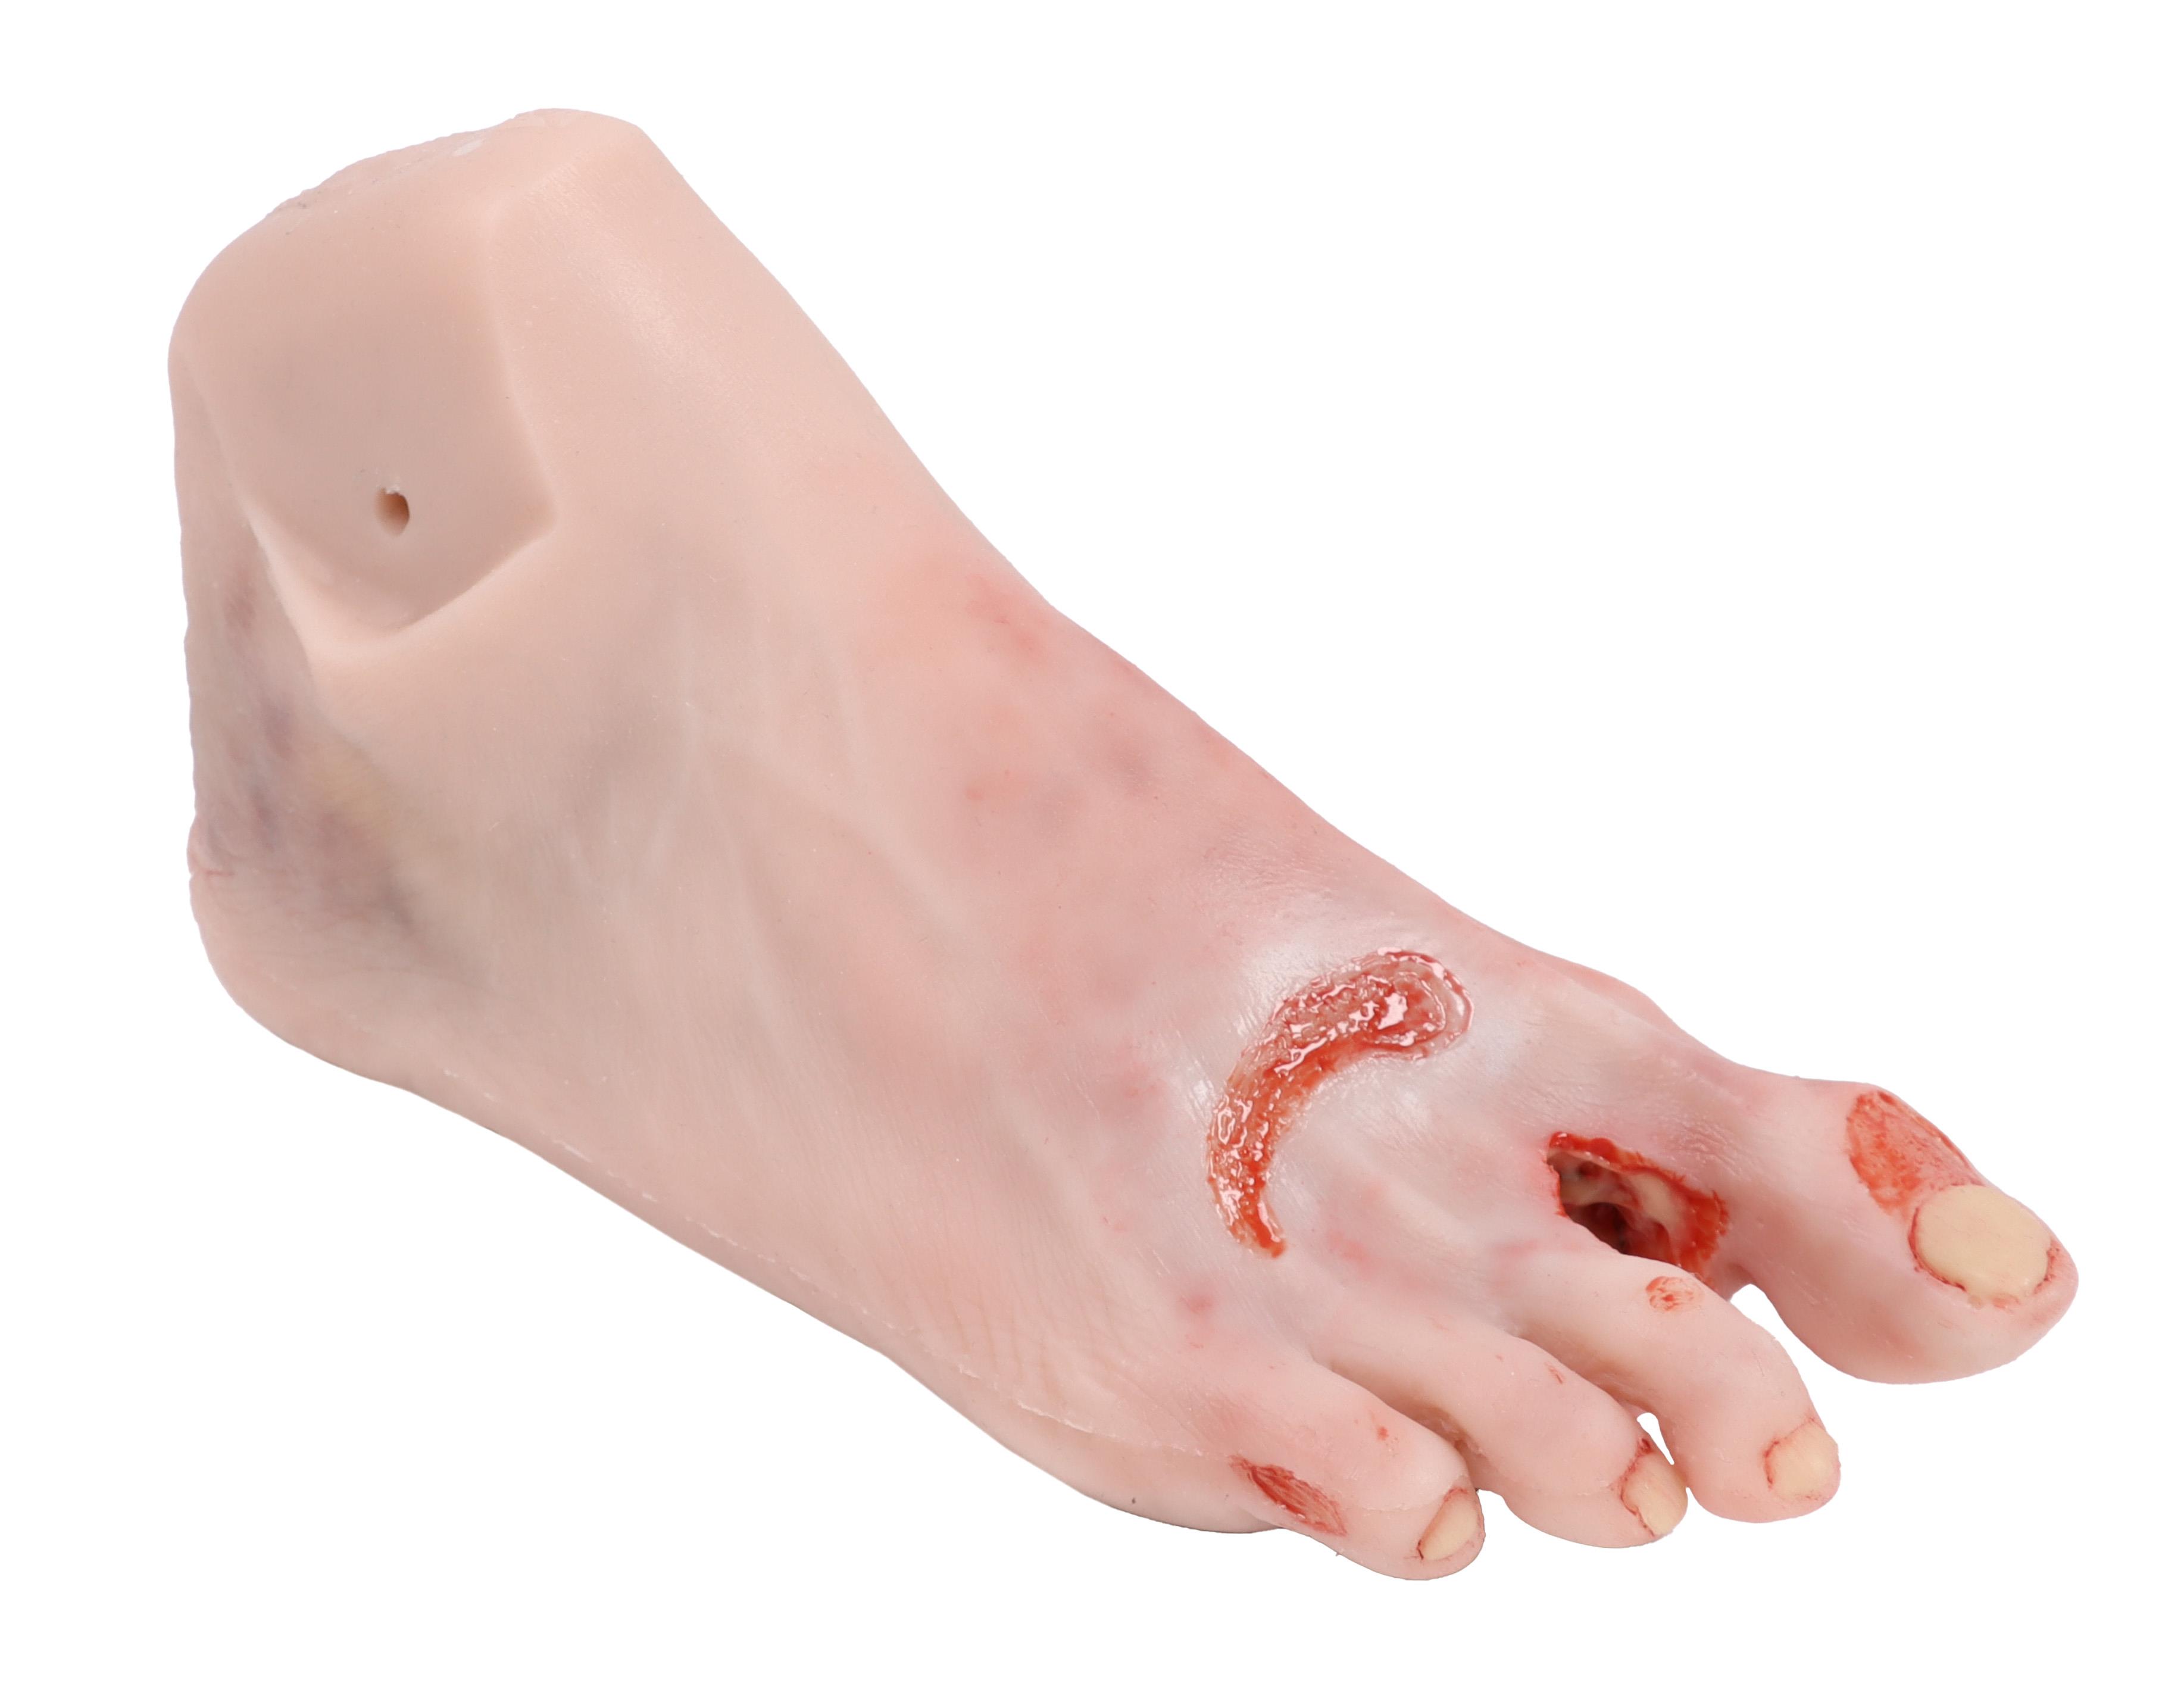 Wound-foot-with-diabetic-foot-syndrome-severe-stage-manikin-version